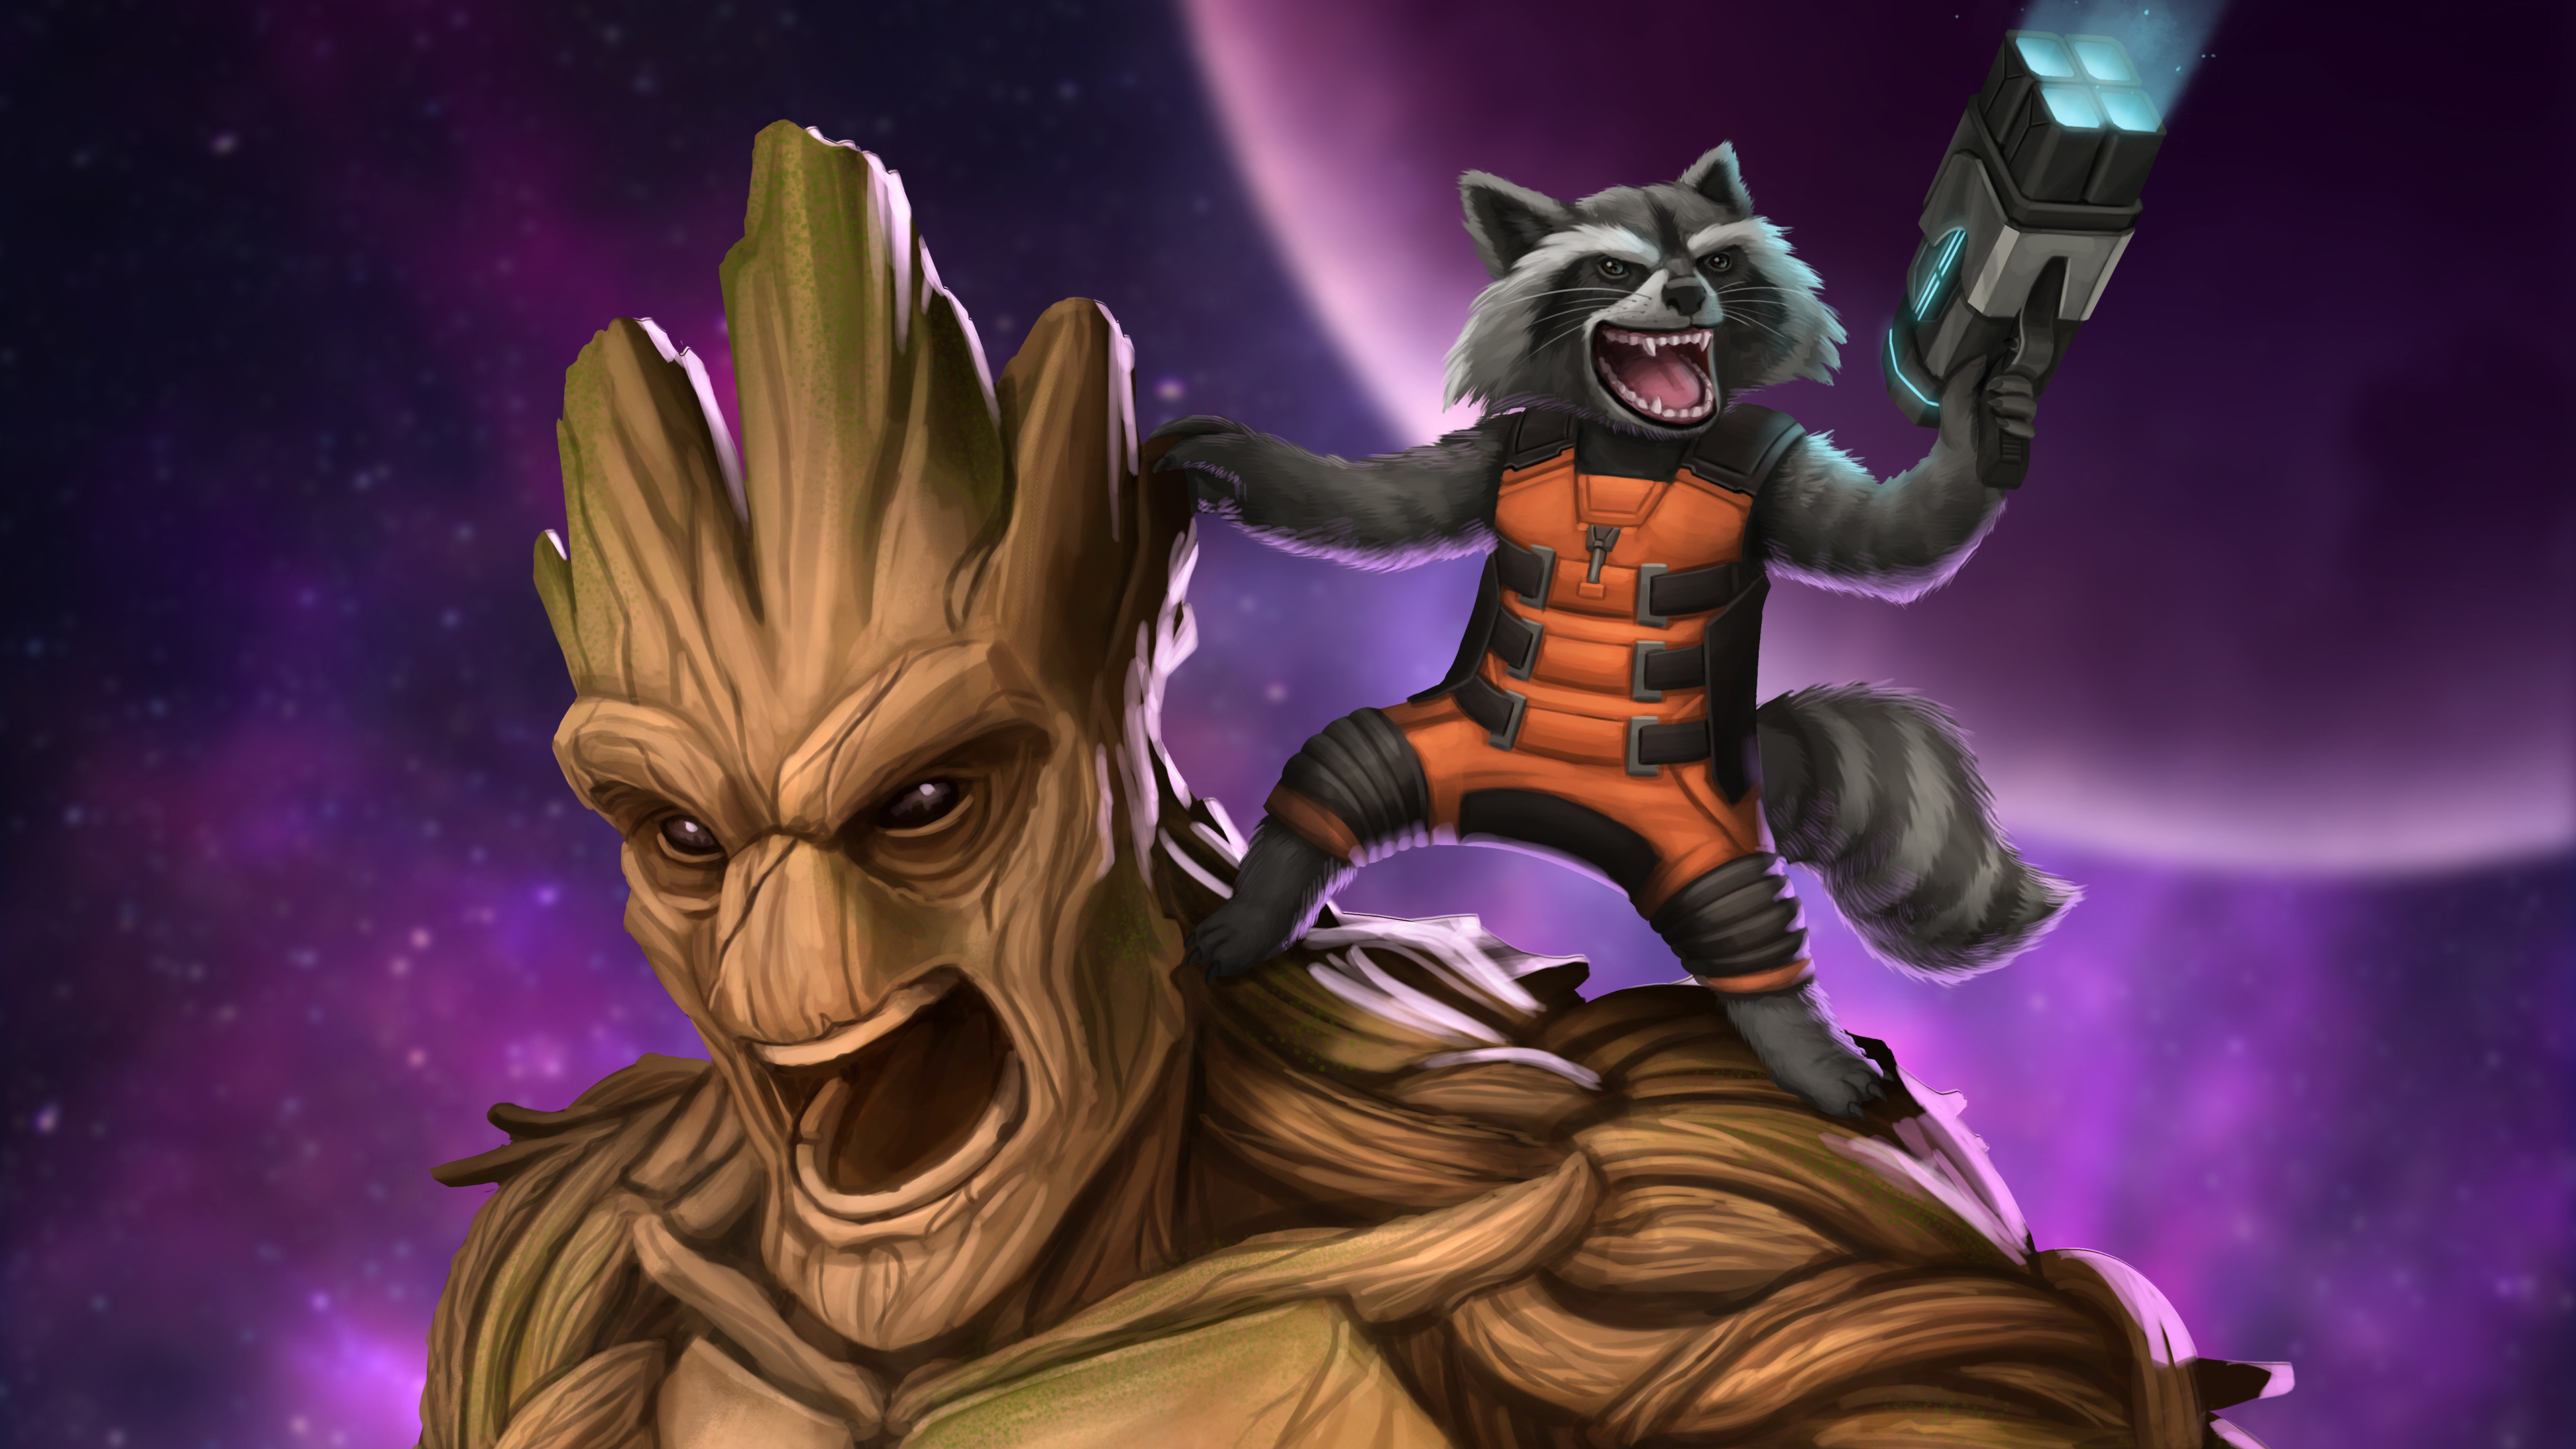 1600x1200 Groot And Rocket Raccoon Artwork 4k 1600x1200 Resolution HD 4k  Wallpapers, Images, Backgrounds, Photos and Pictures